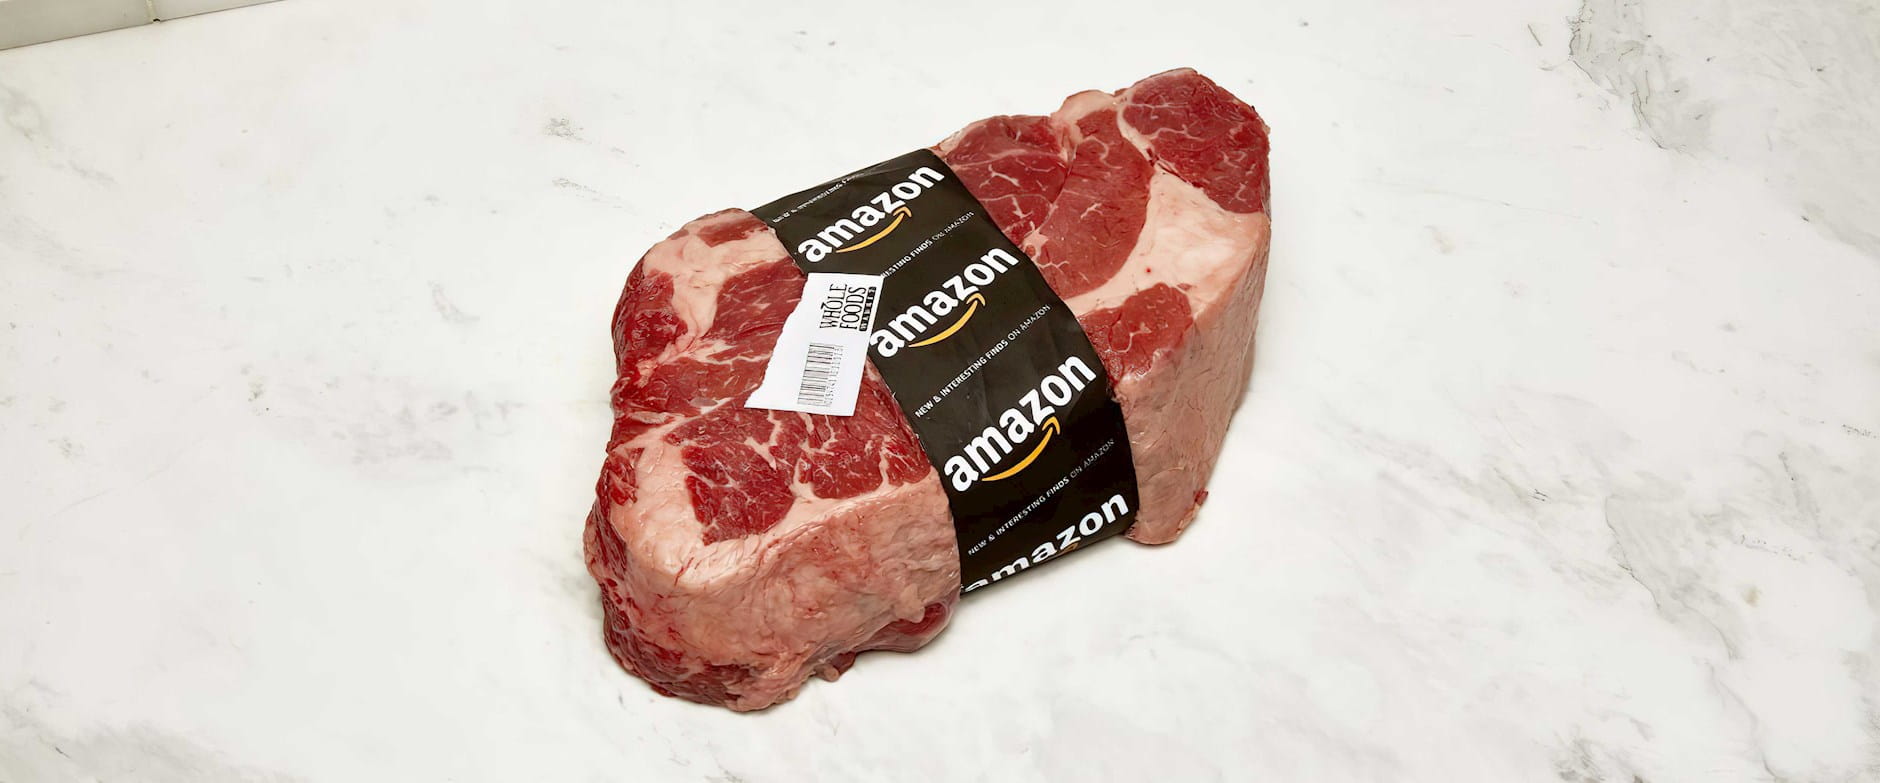 Large steak with Amazon shipping wrap on it